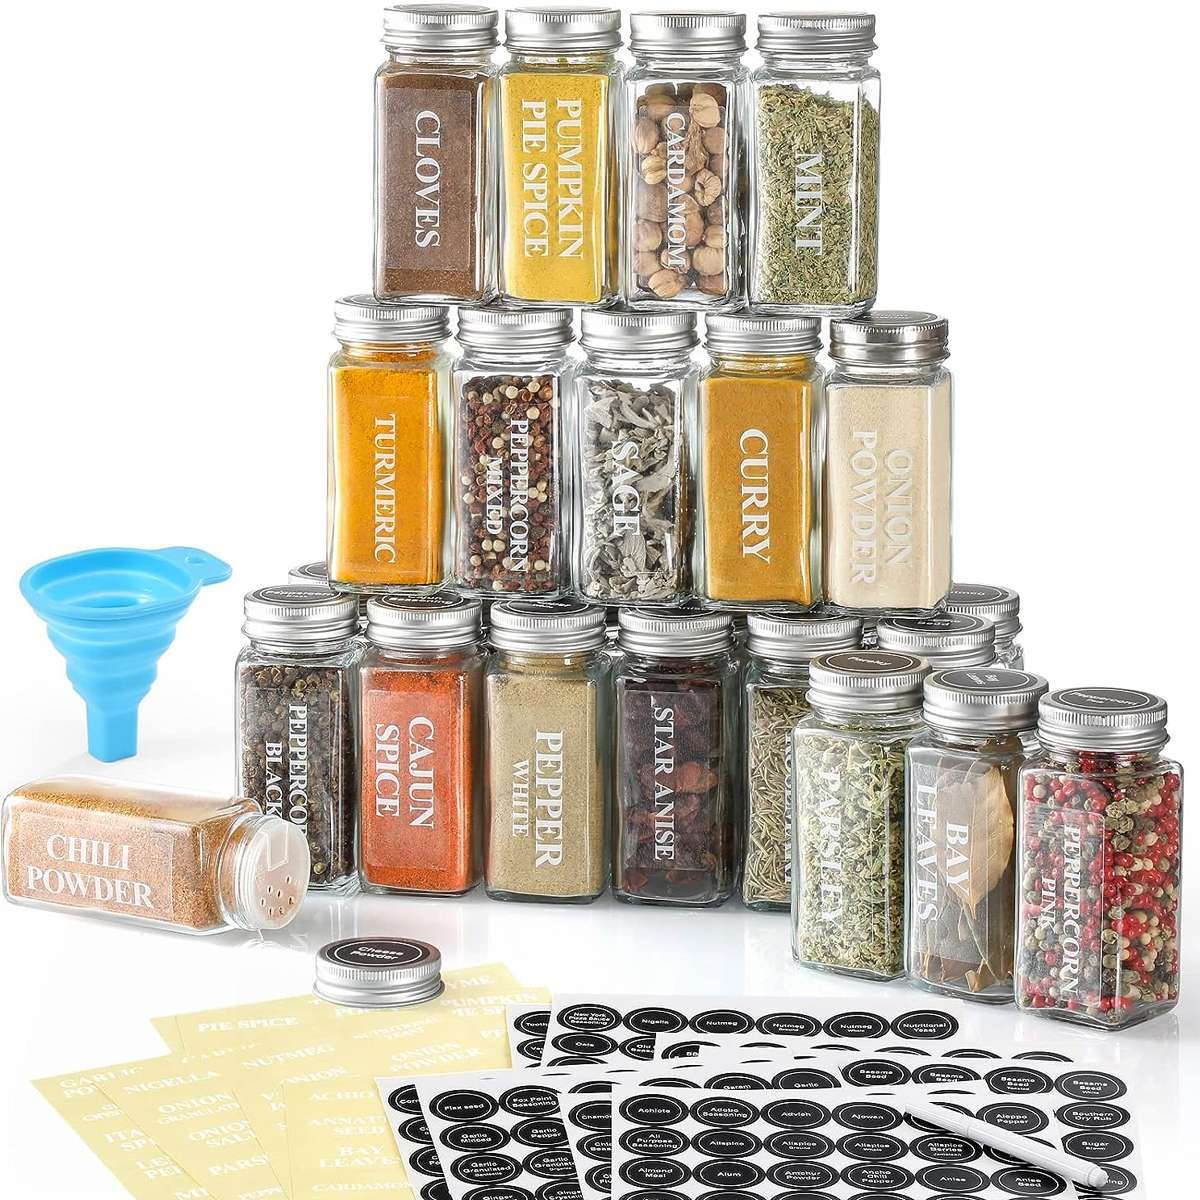 AOZITA 24 Pcs Glass Spice Jars with Labels - 4oz Empty Square Spice Bottles  Containers - amznpastore